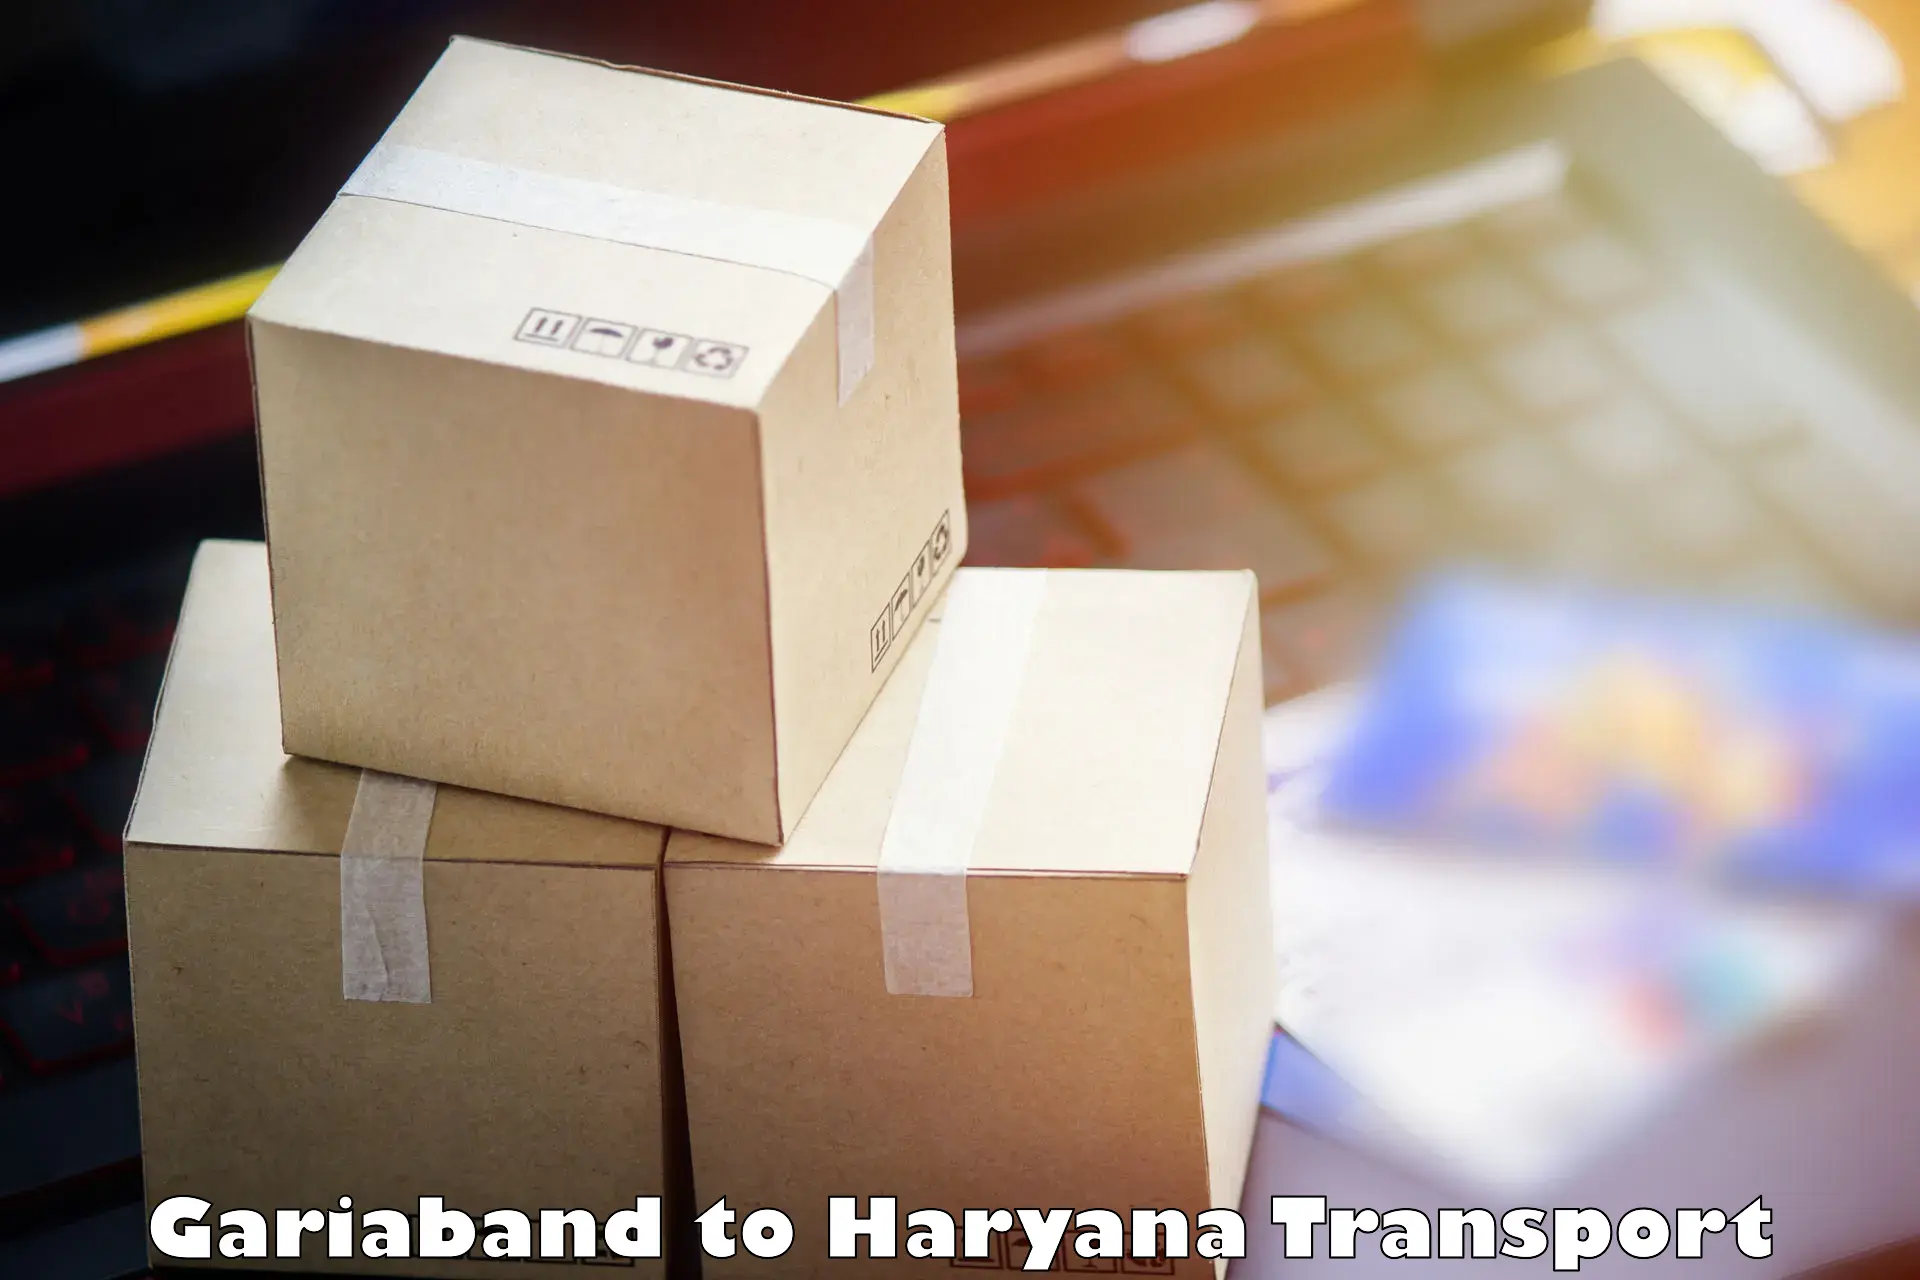 Nearby transport service Gariaband to Haryana